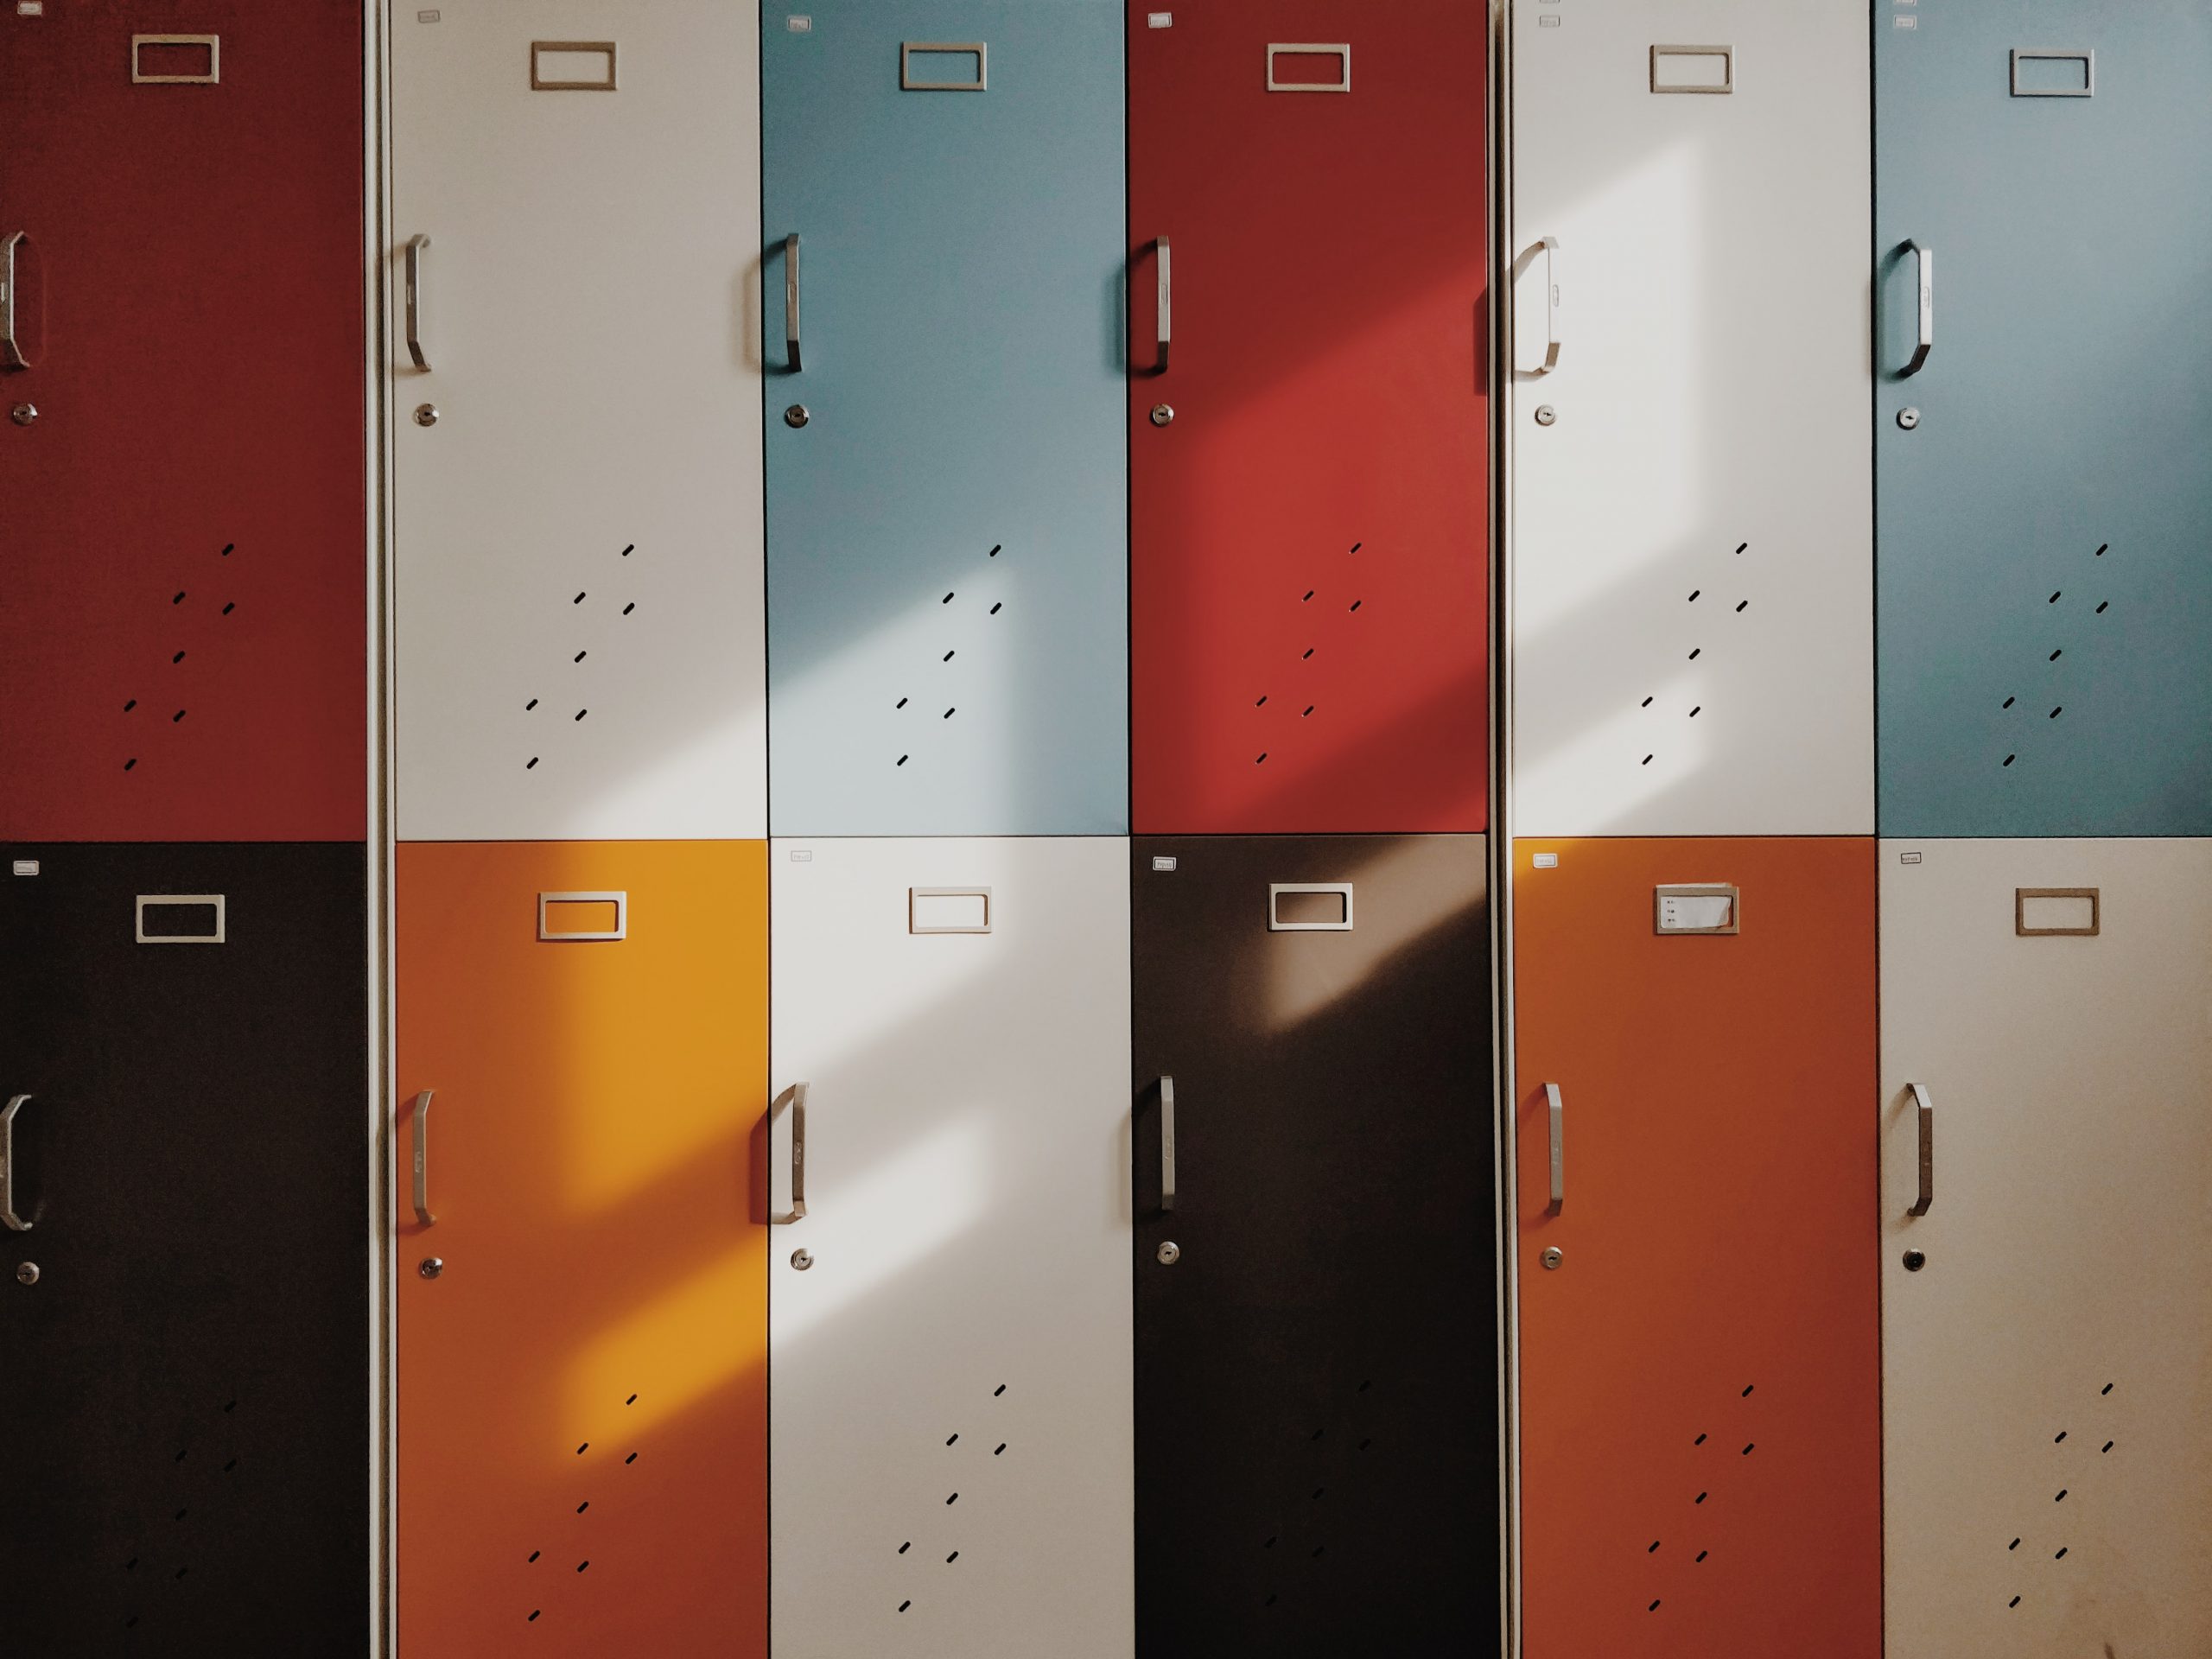 Photograph of colorful school lockers